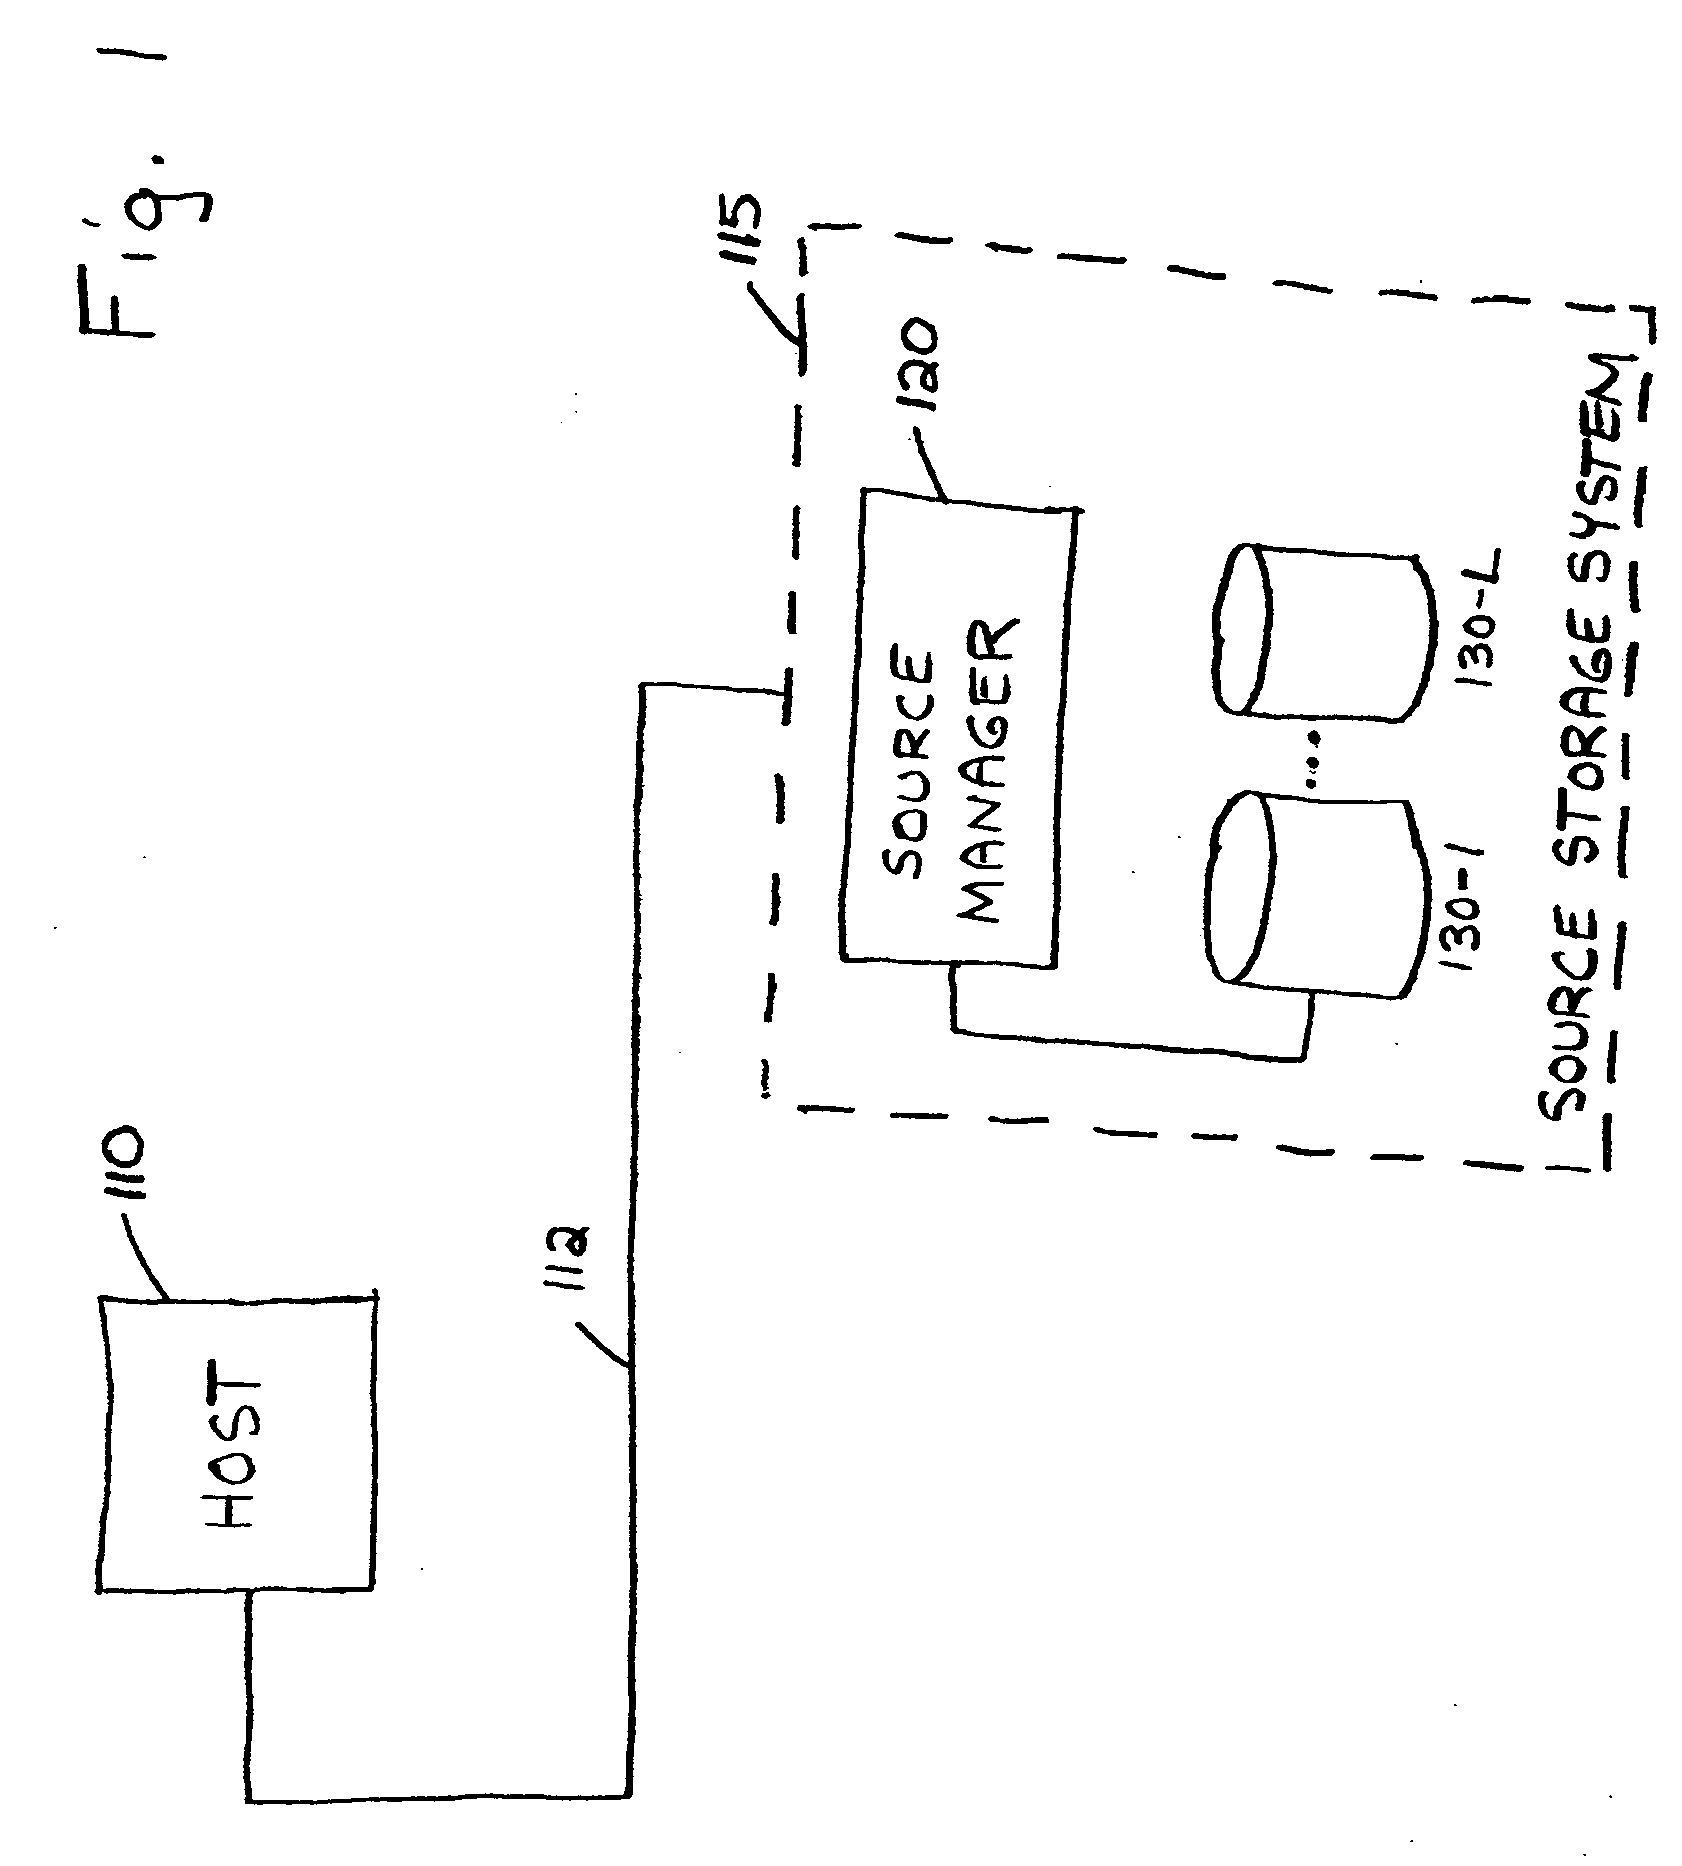 System and method for file migration